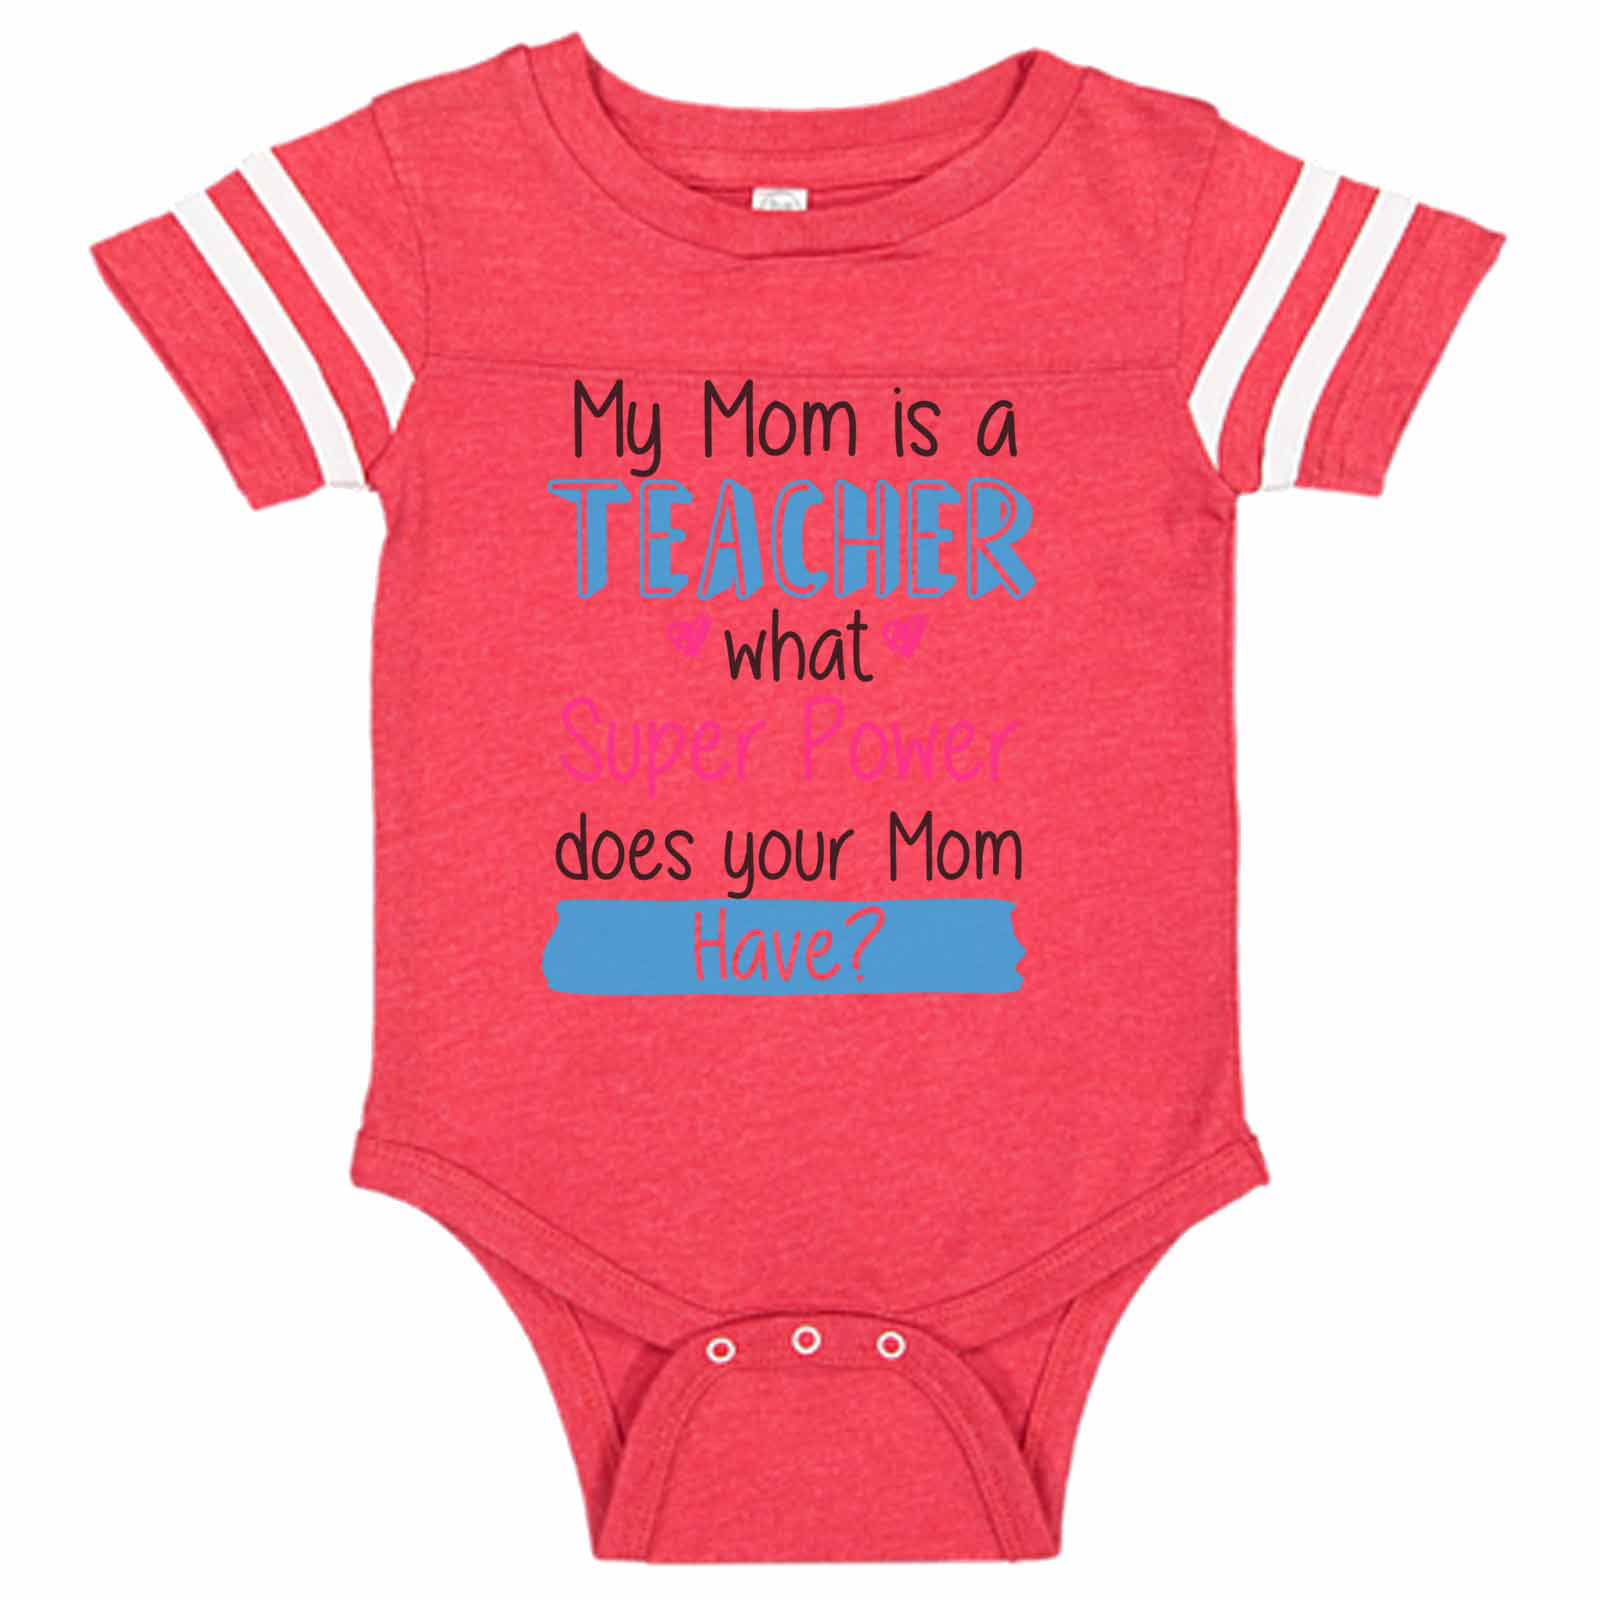 What Super Power Does Yours Have? Baby T-shirt Tees My Mums is A Teacher 